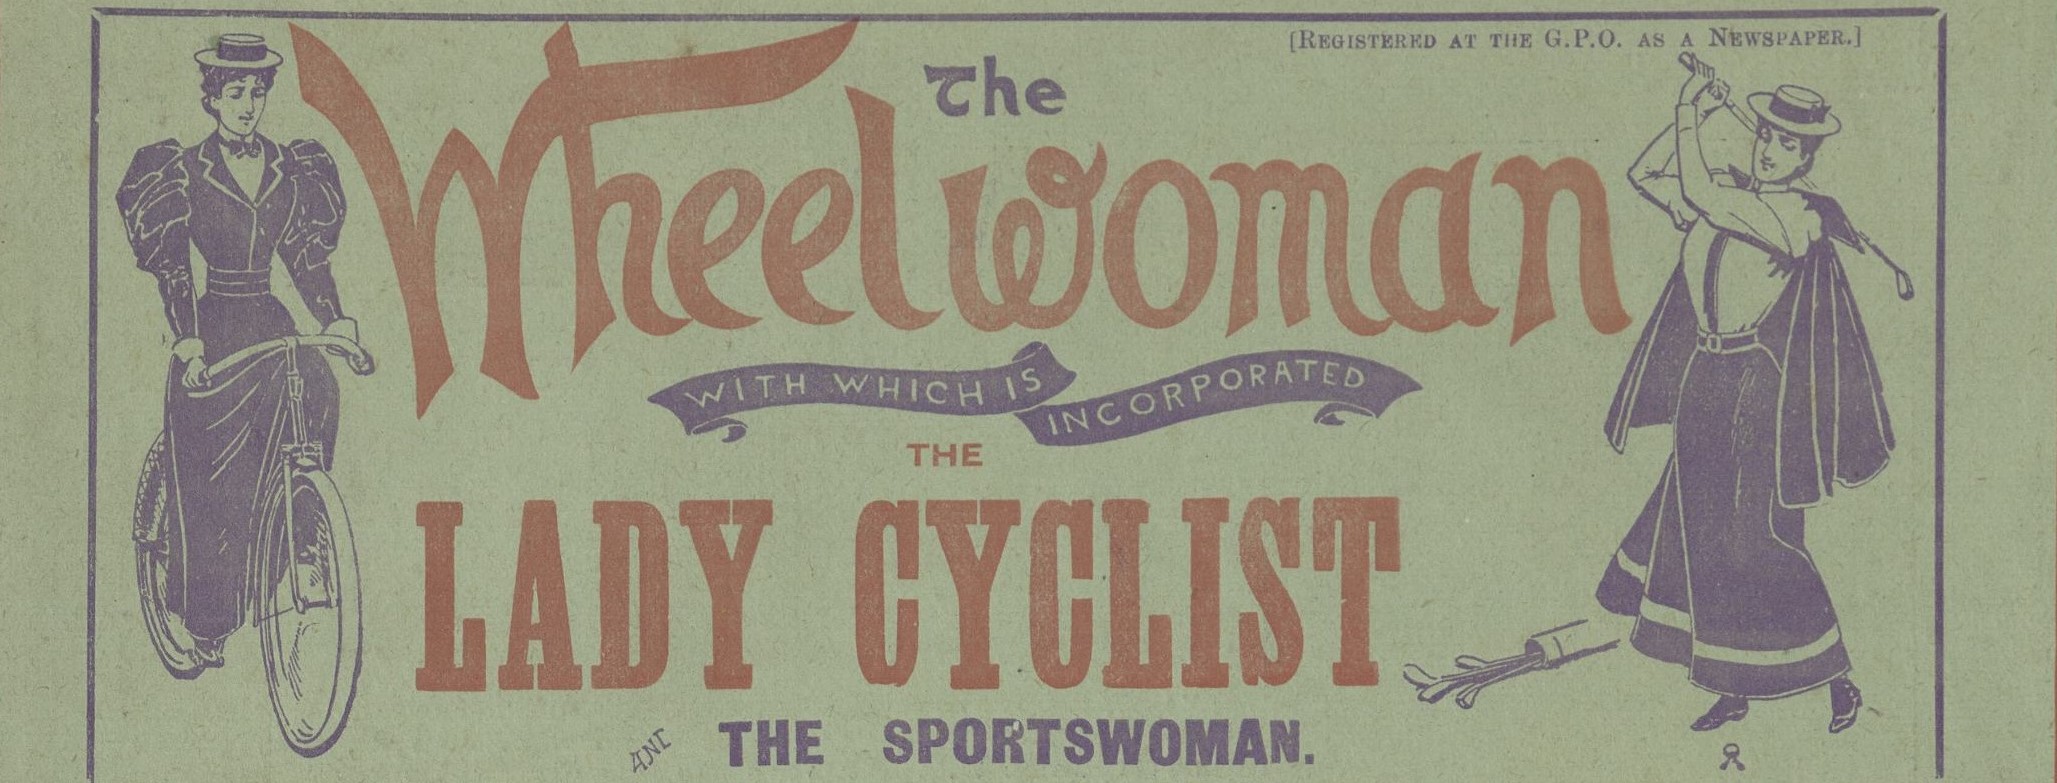 Header for the Victorian magazine The Wheelwoman